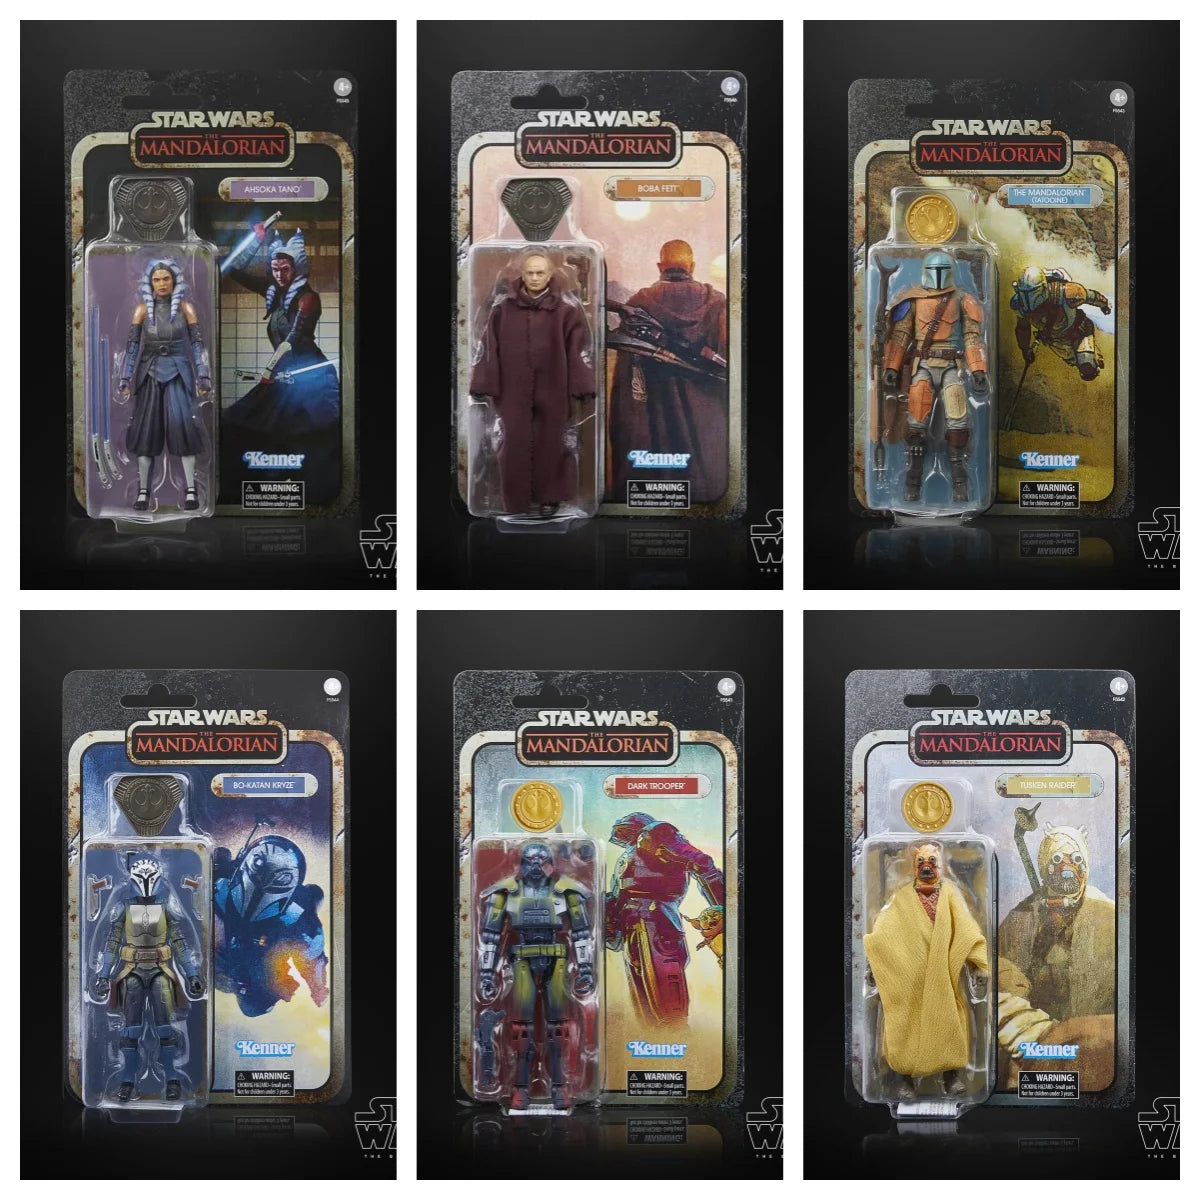 6 Inches Star Wars Figure Kenner Retro The Mandalorian Tatooine Action Figures Collect Model Desktop Decor Toy Adult Kid Gift